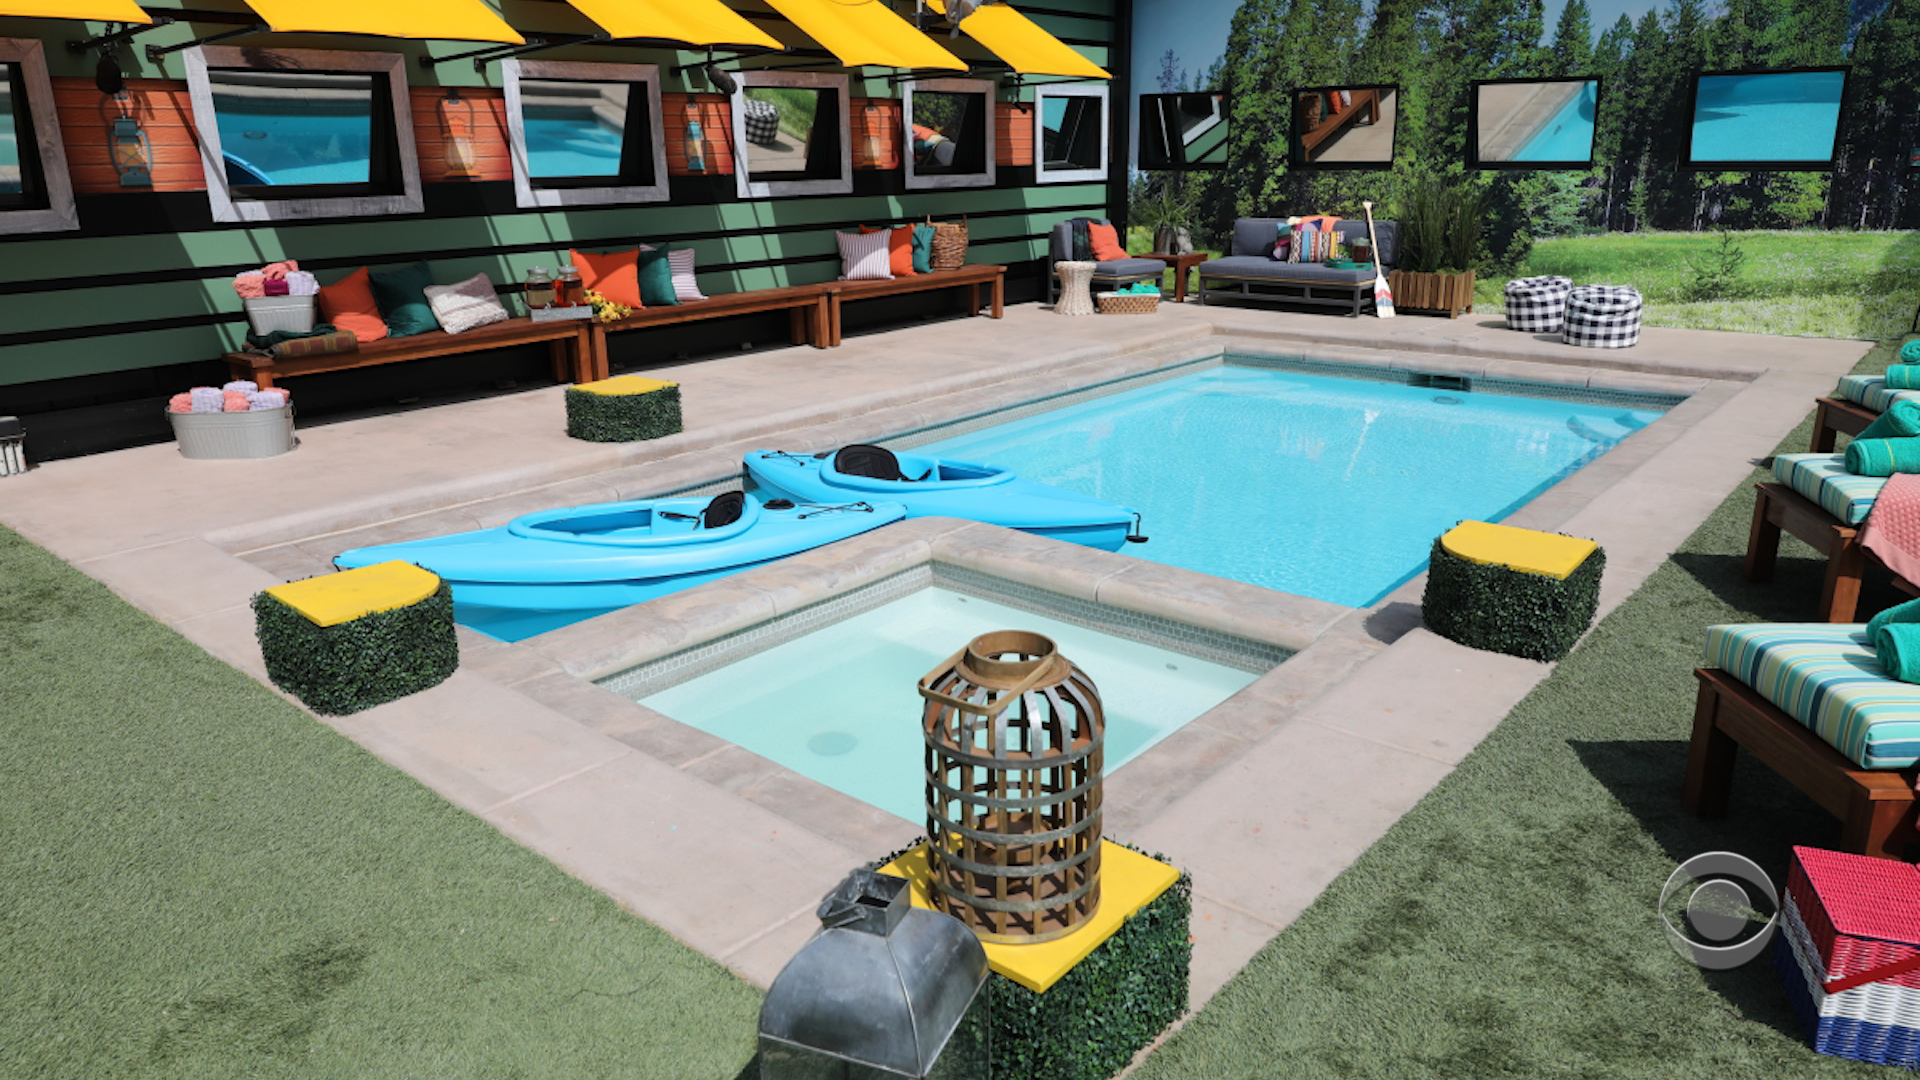 Big Brother 3 - Swimming pool and canoes